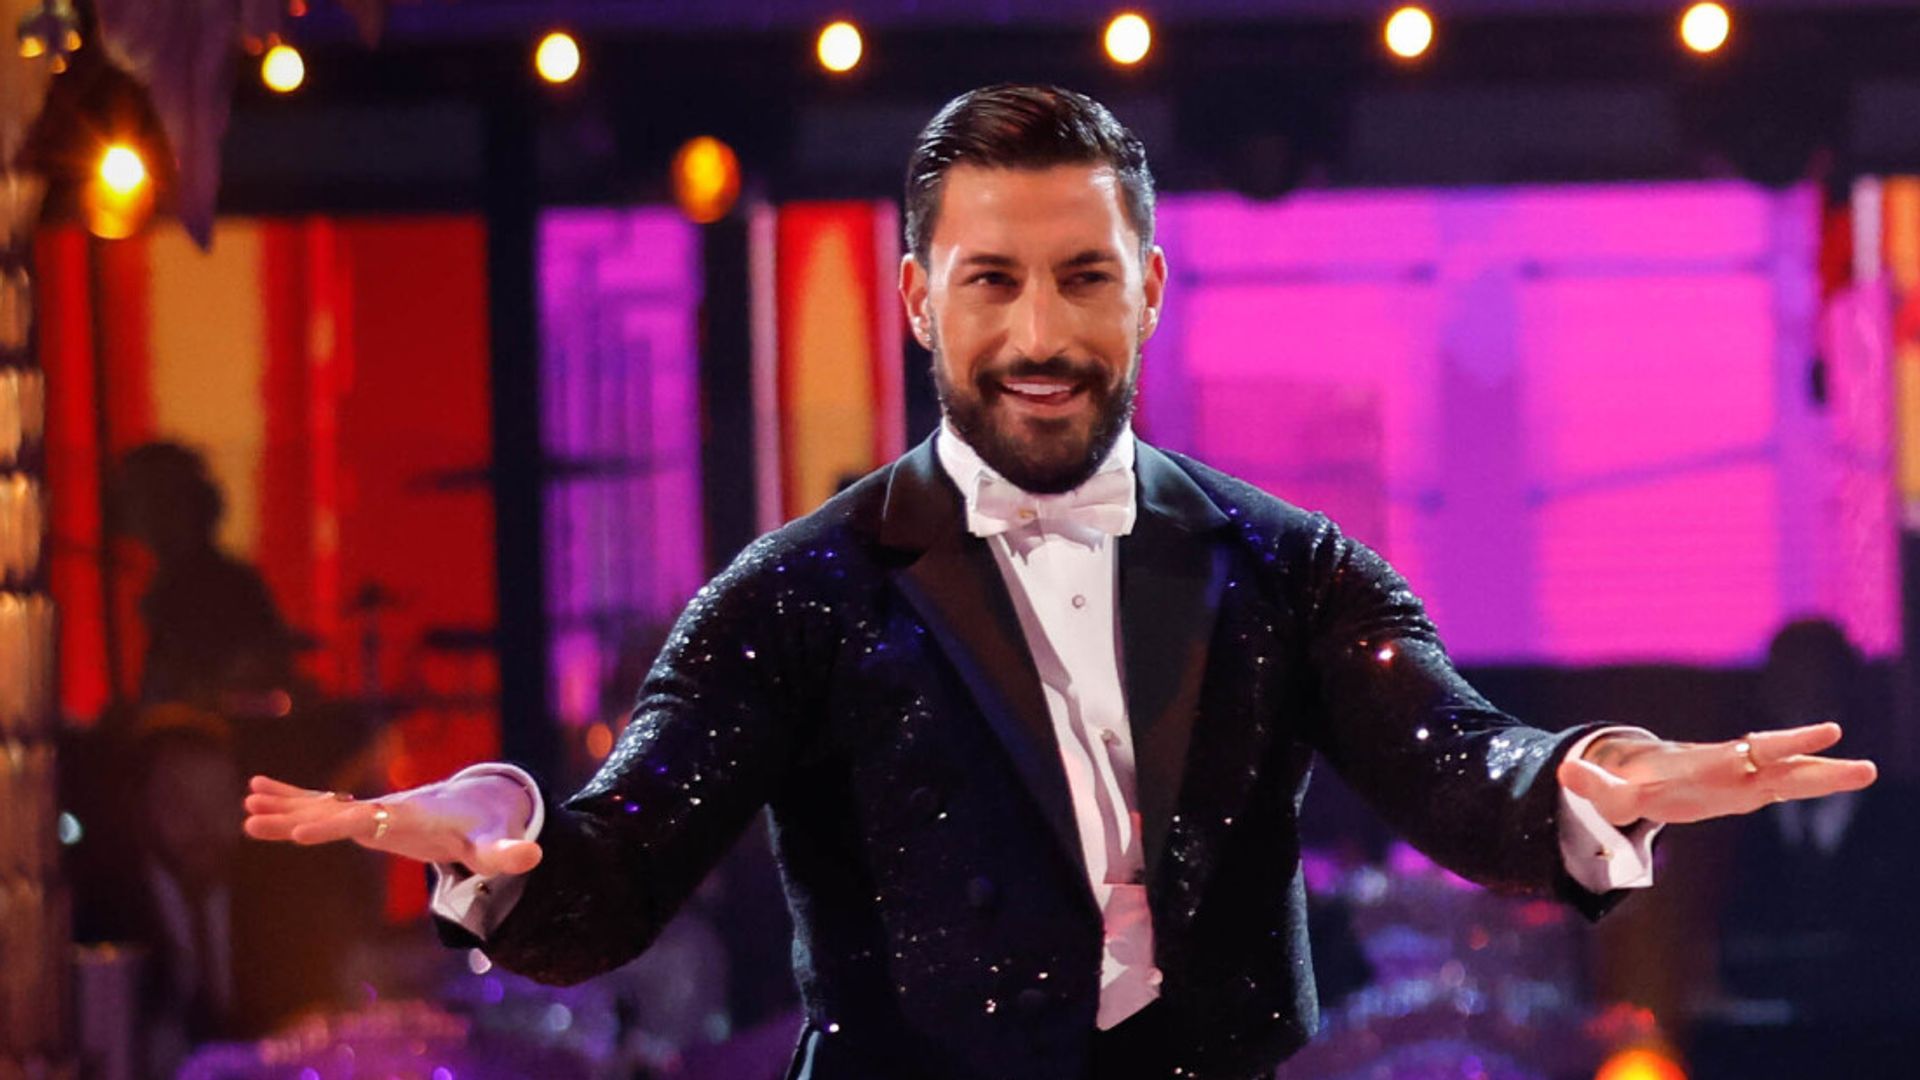 Strictly Come Dancing star denies claims of 'abusive or threatening behaviour'...